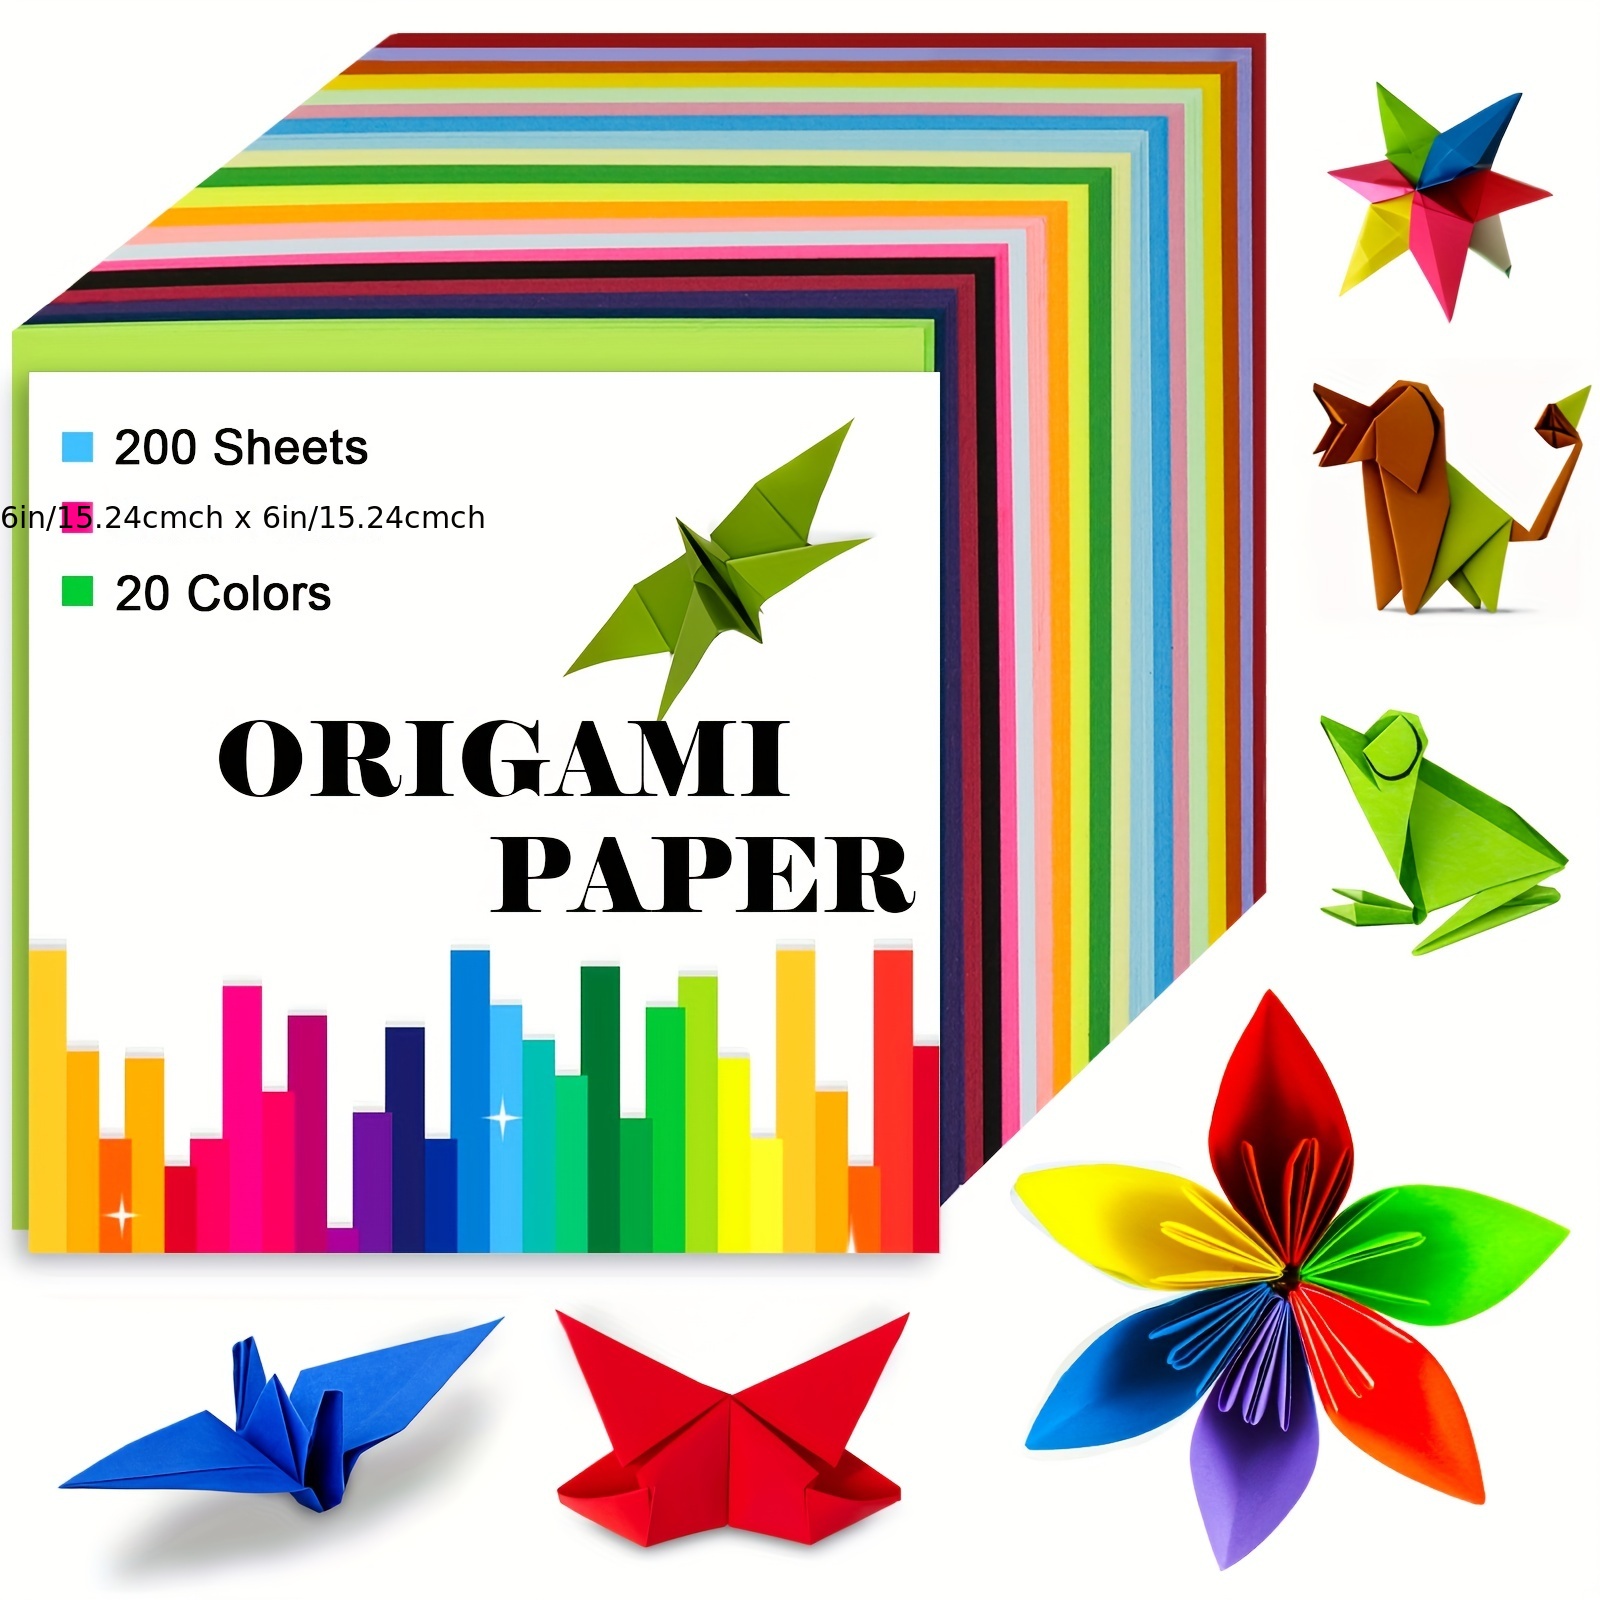 150 Sheets 15 Colors Construction Paper, A4 Colored Paper, Origami Paper, 120 gsm, Drawing Paper, Copy Paper, for DIY Arts Crafts (21 * 30cm/ 11.8*